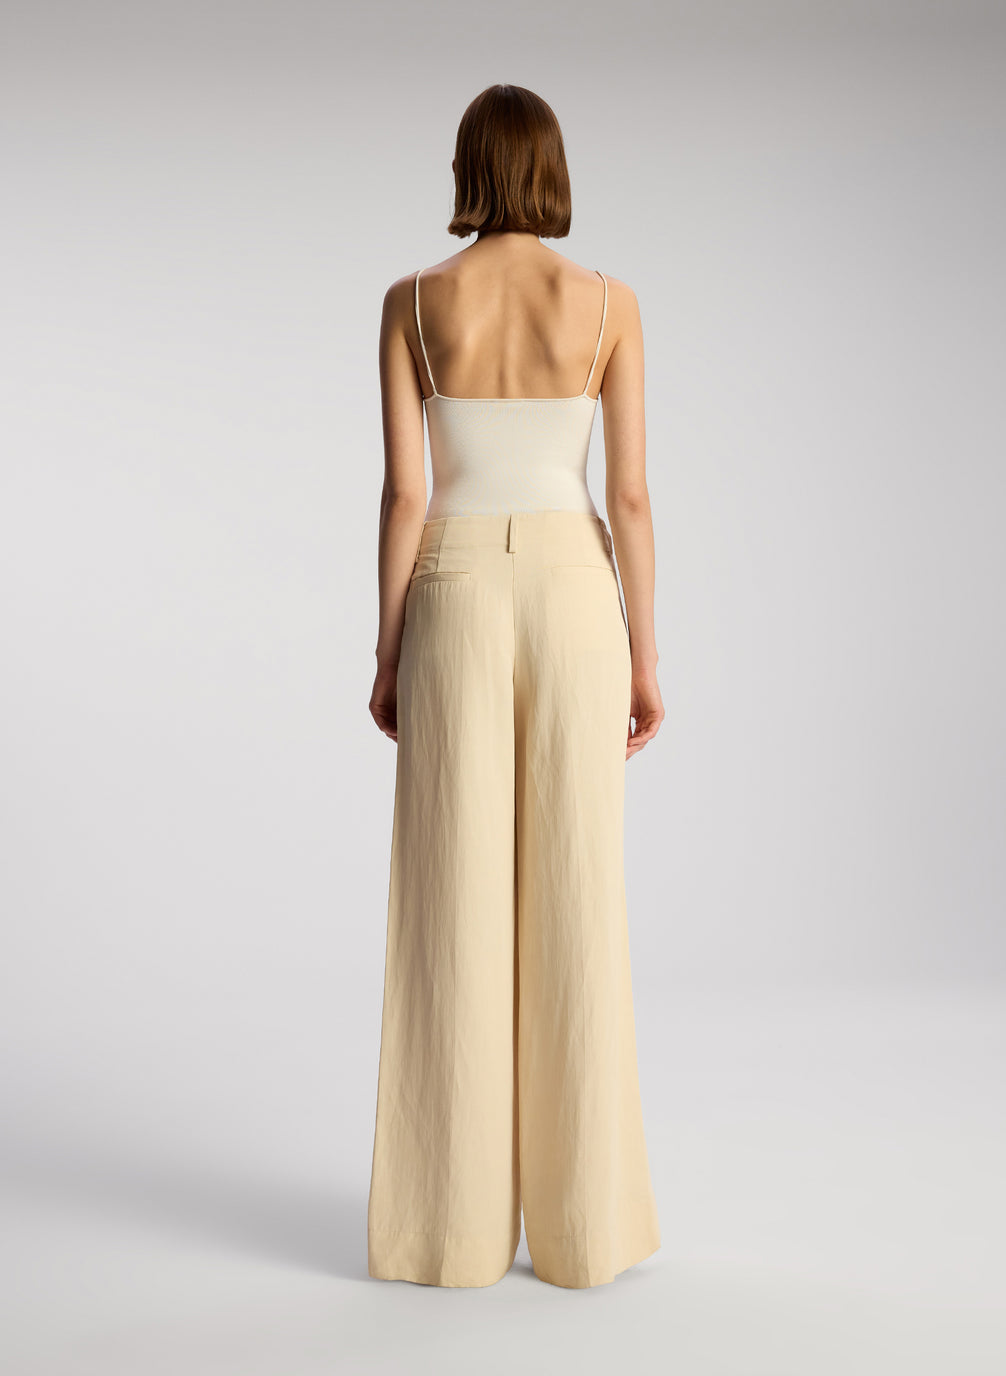 back view of woman wearing off white bodysuit and beige wide leg pants